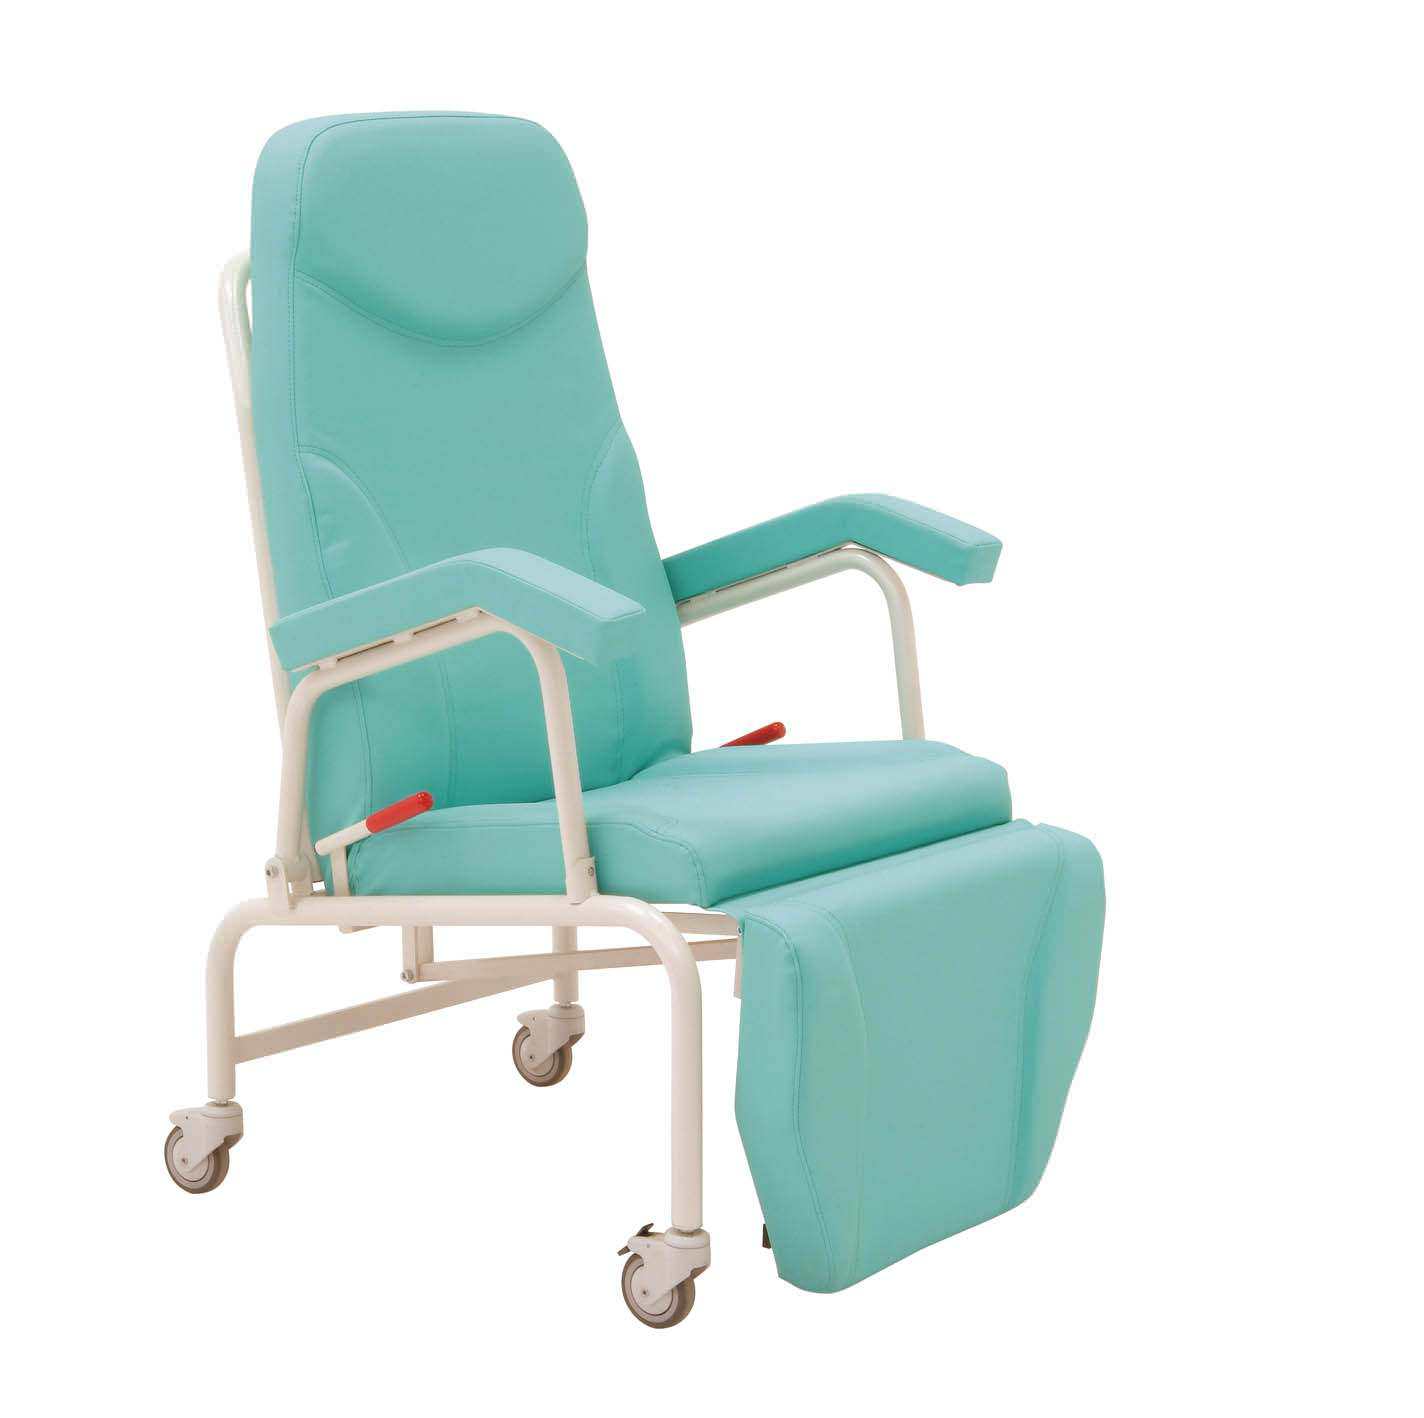 Reclining medical sleeper chair / on casters / manual 21162 Inmoclinc